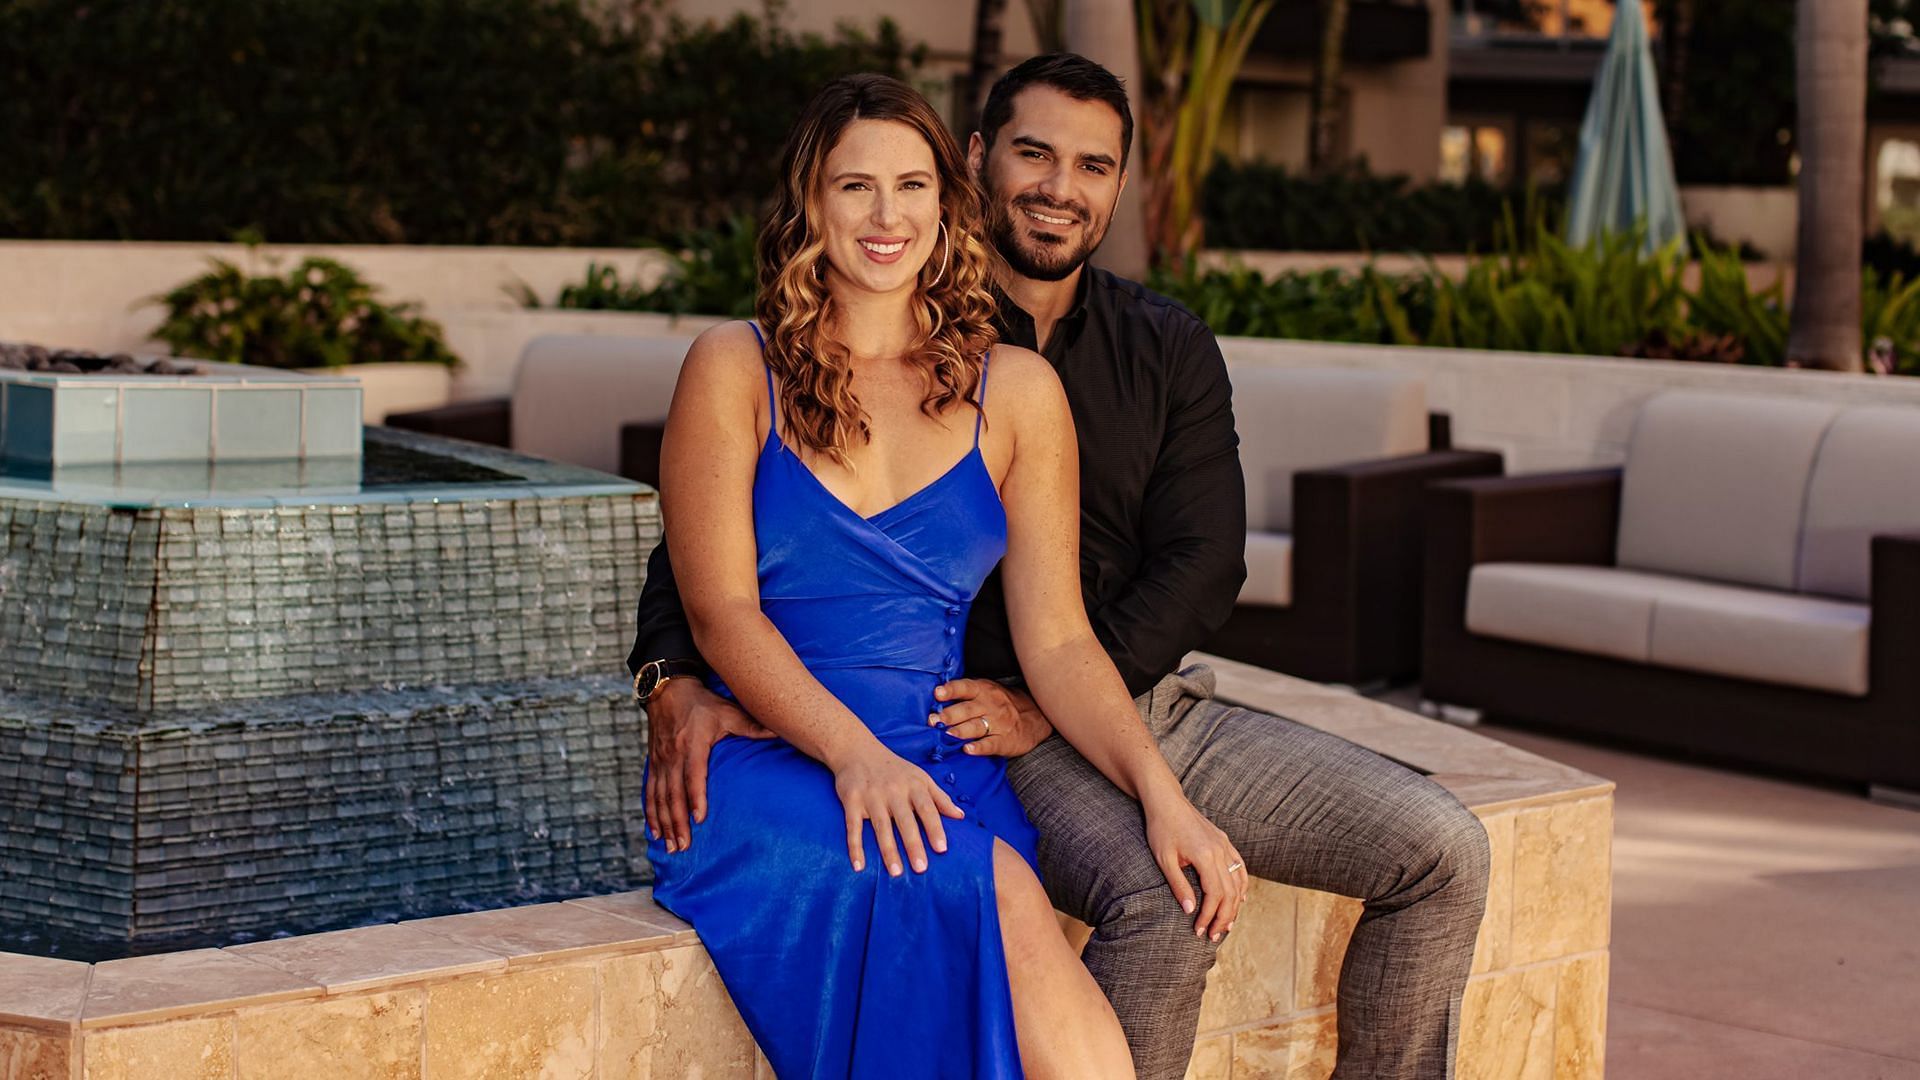 Lindy and Miguel to get married on Married at First Sight (Image via Lifetime)